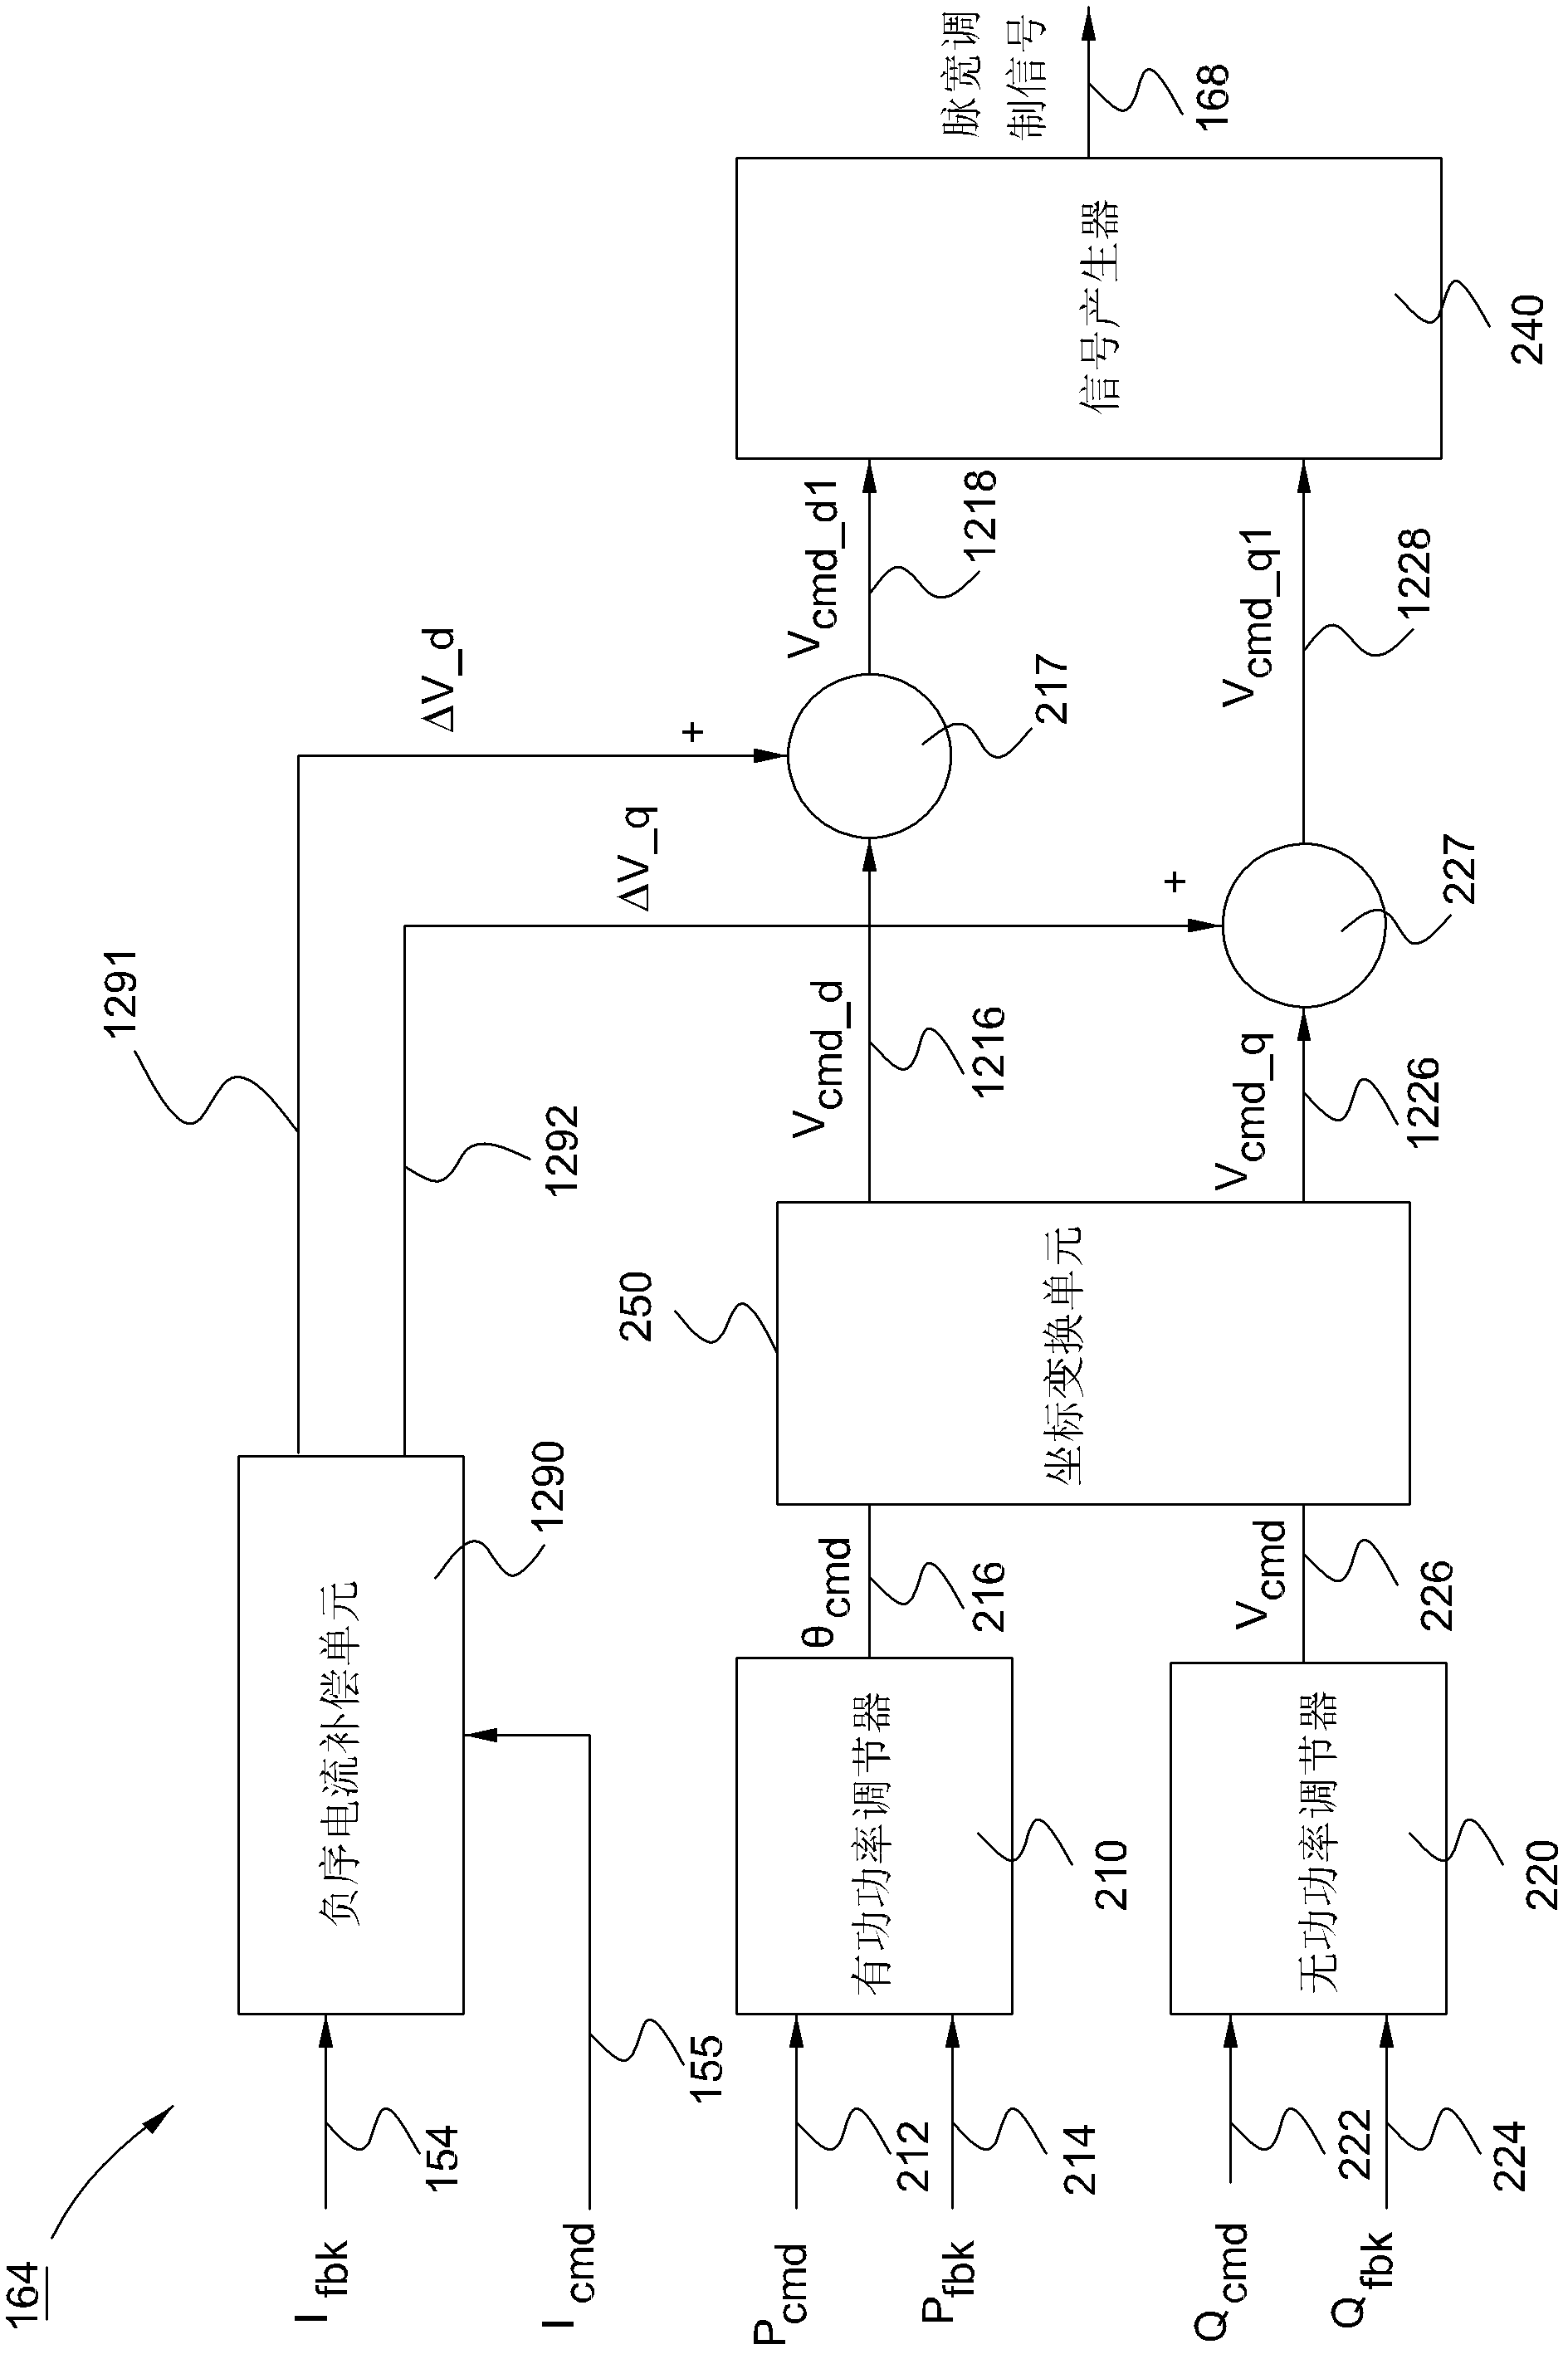 Energy conversion system and method with negative-sequence current compensation mechanism